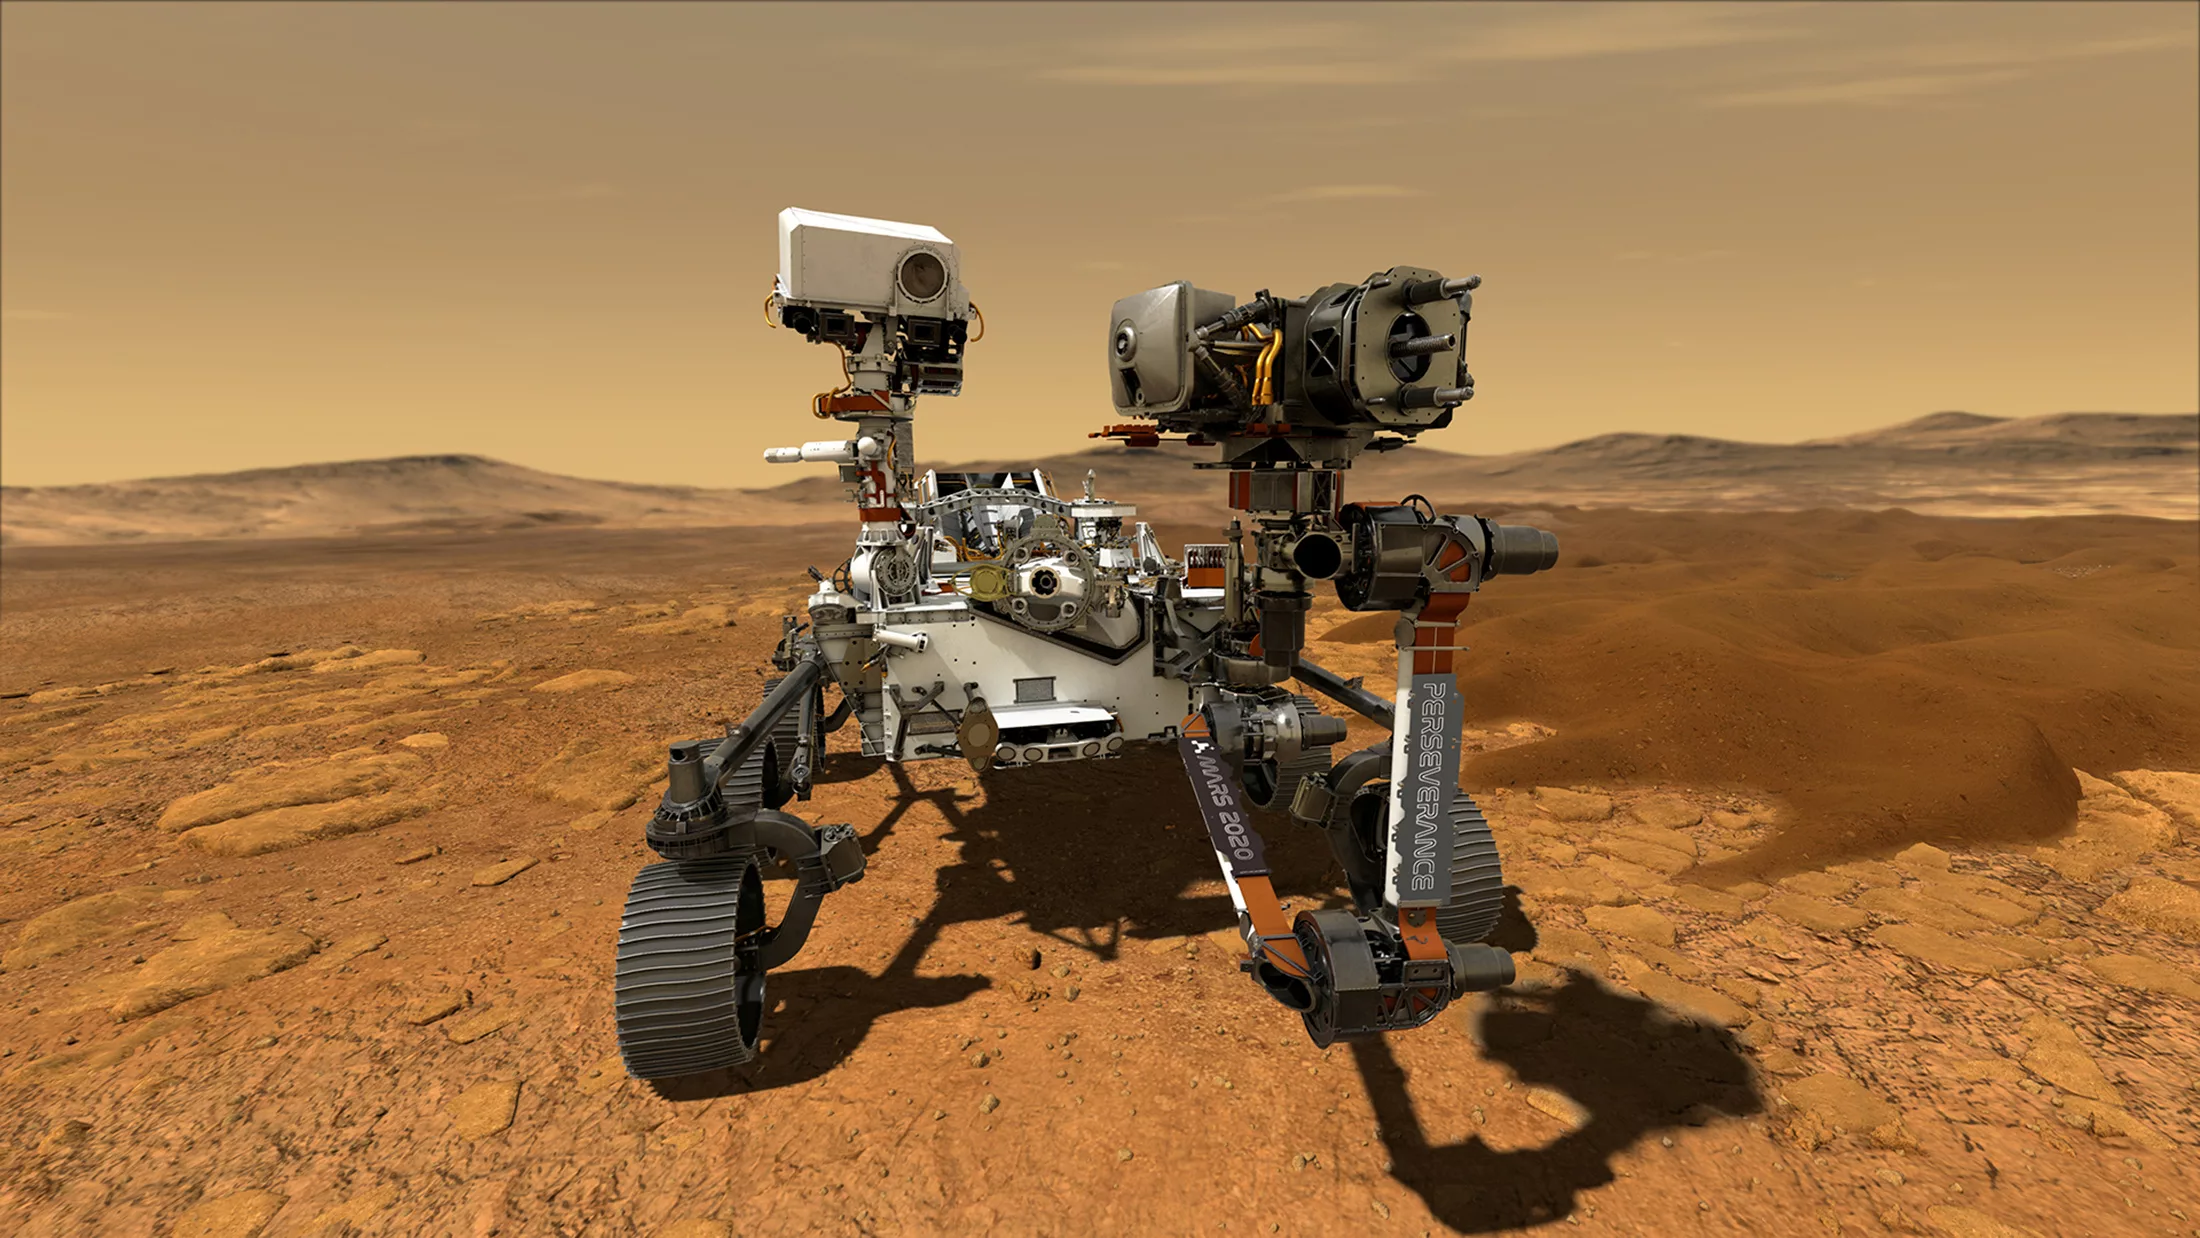 FILE PHOTO: NASA's Perseverance Mars rover is seen in an undated illustration provided by Jet Propulsion Laboratory